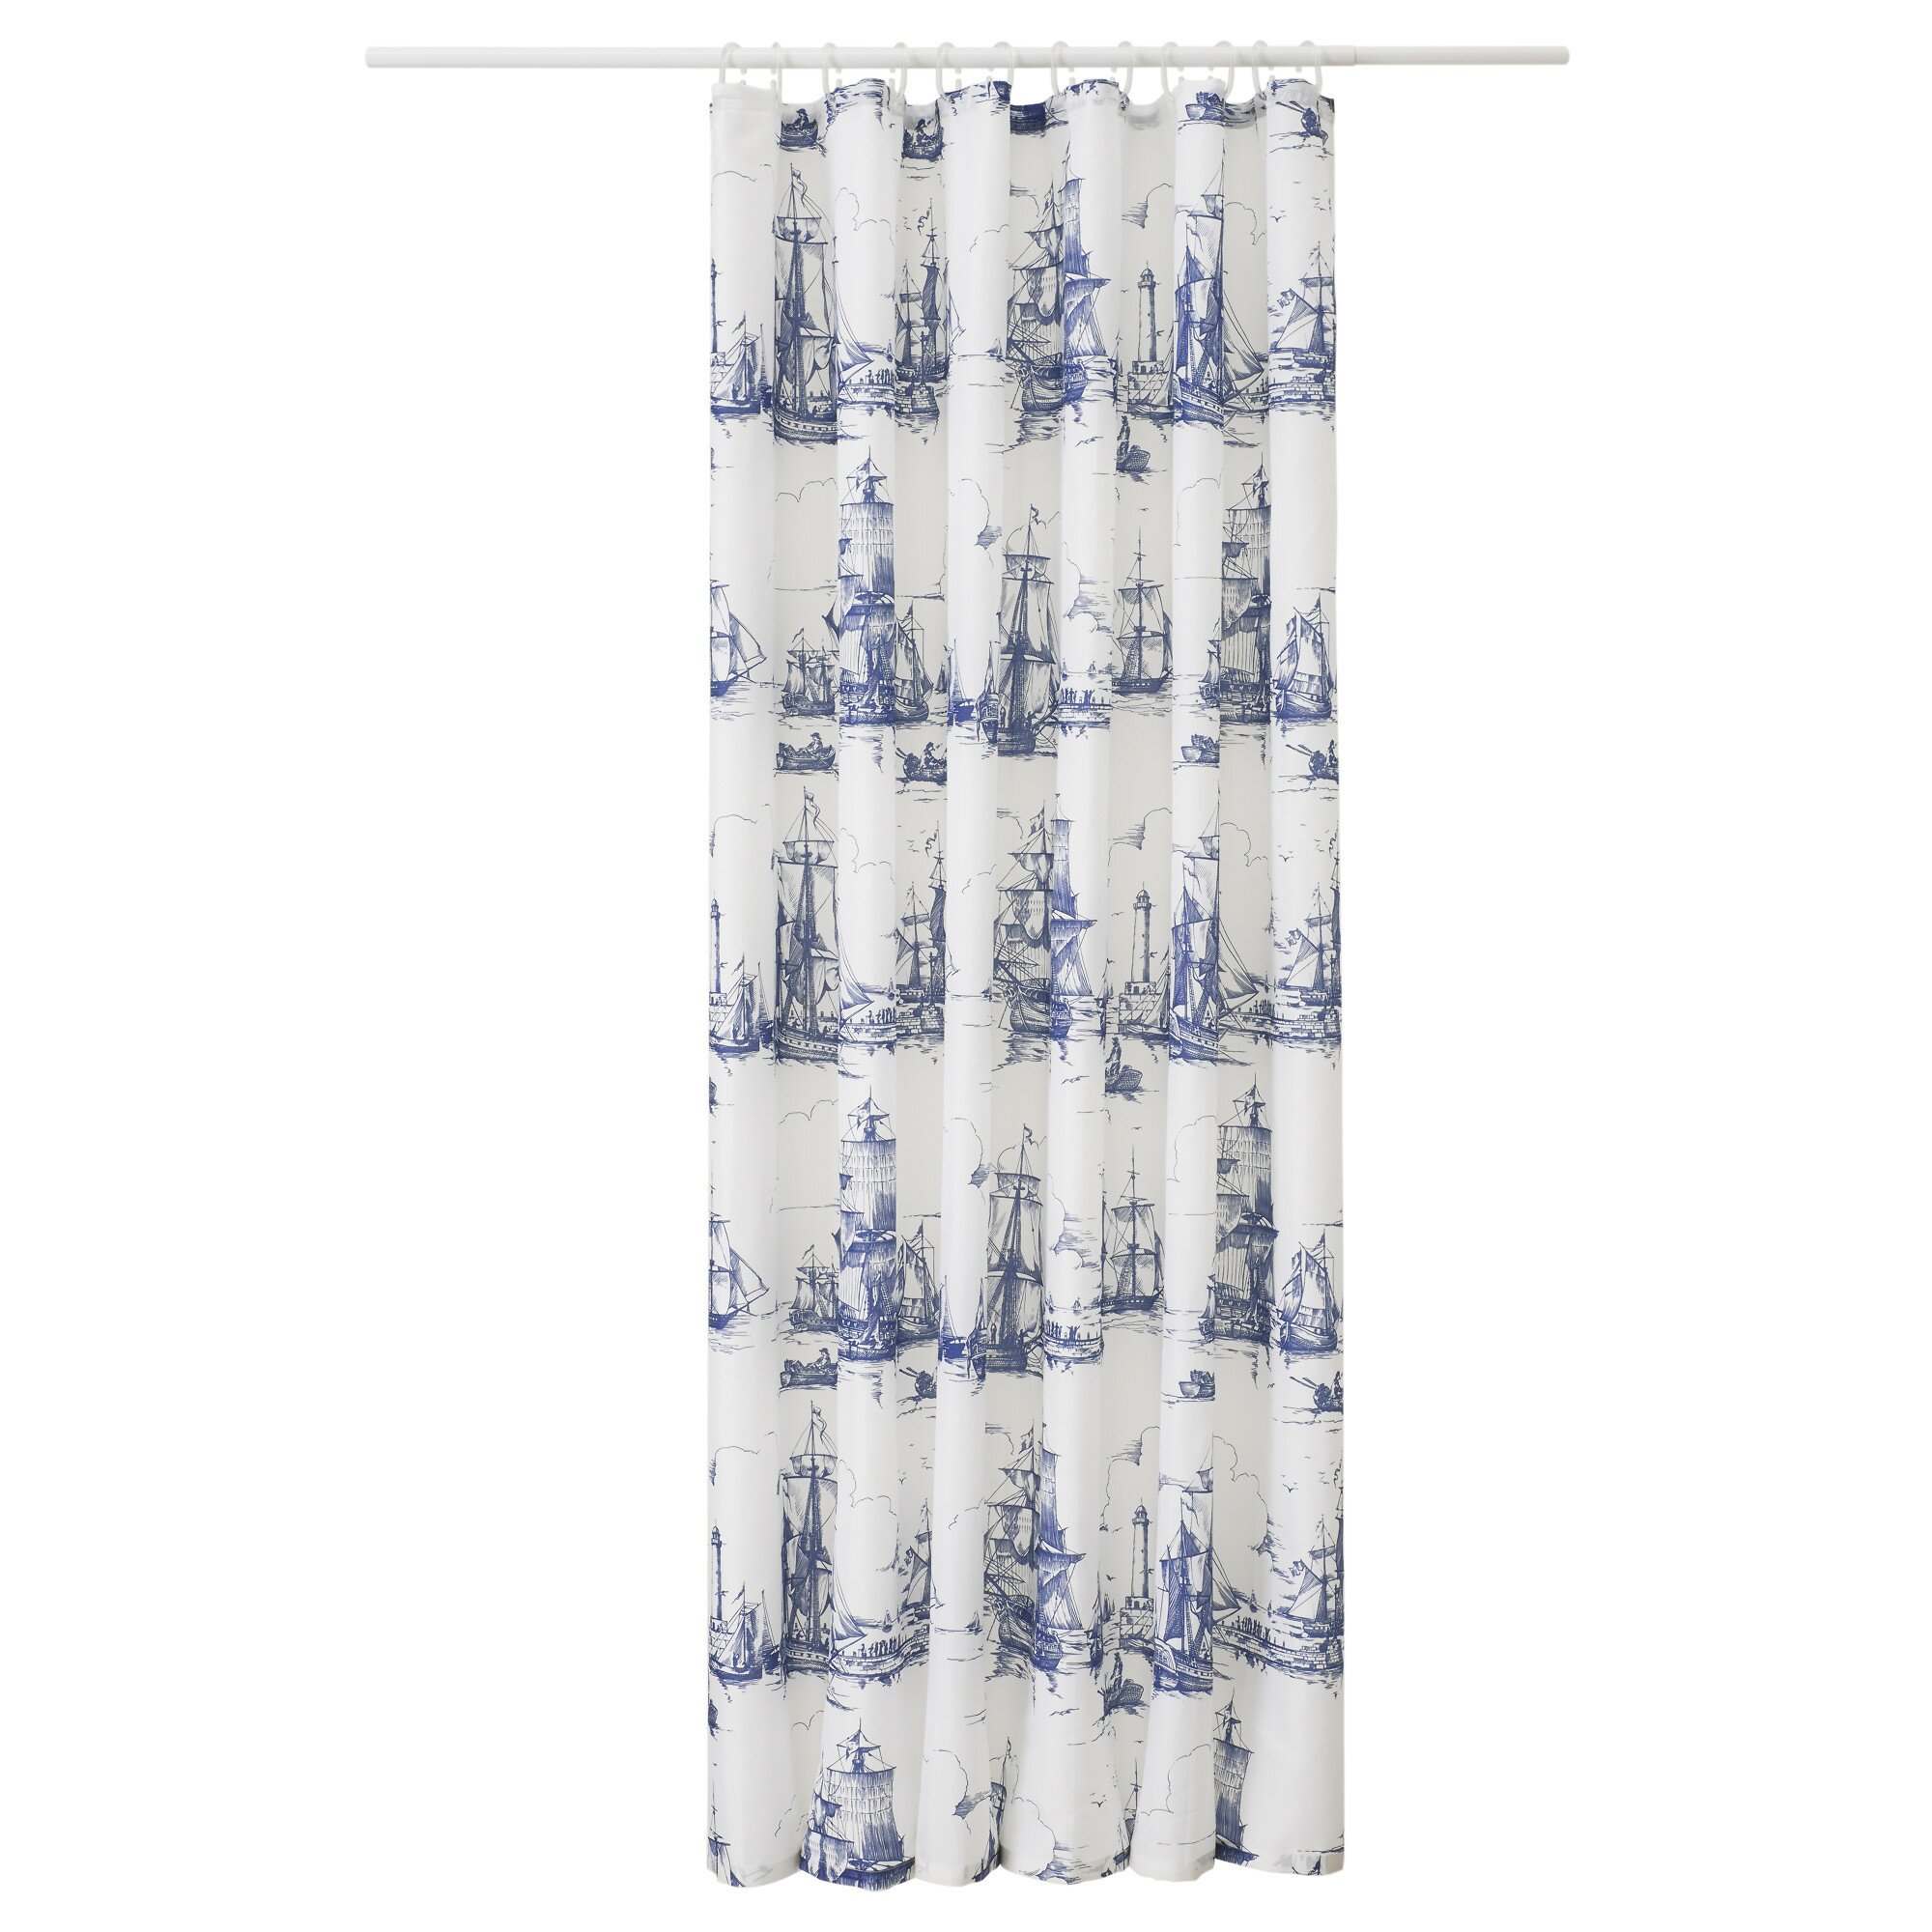 Ikea Shower Curtain for Best Your Bathroom Decoration: Narrow Shower Curtain | Octopus Shower Curtain Ikea | Ikea Shower Curtain